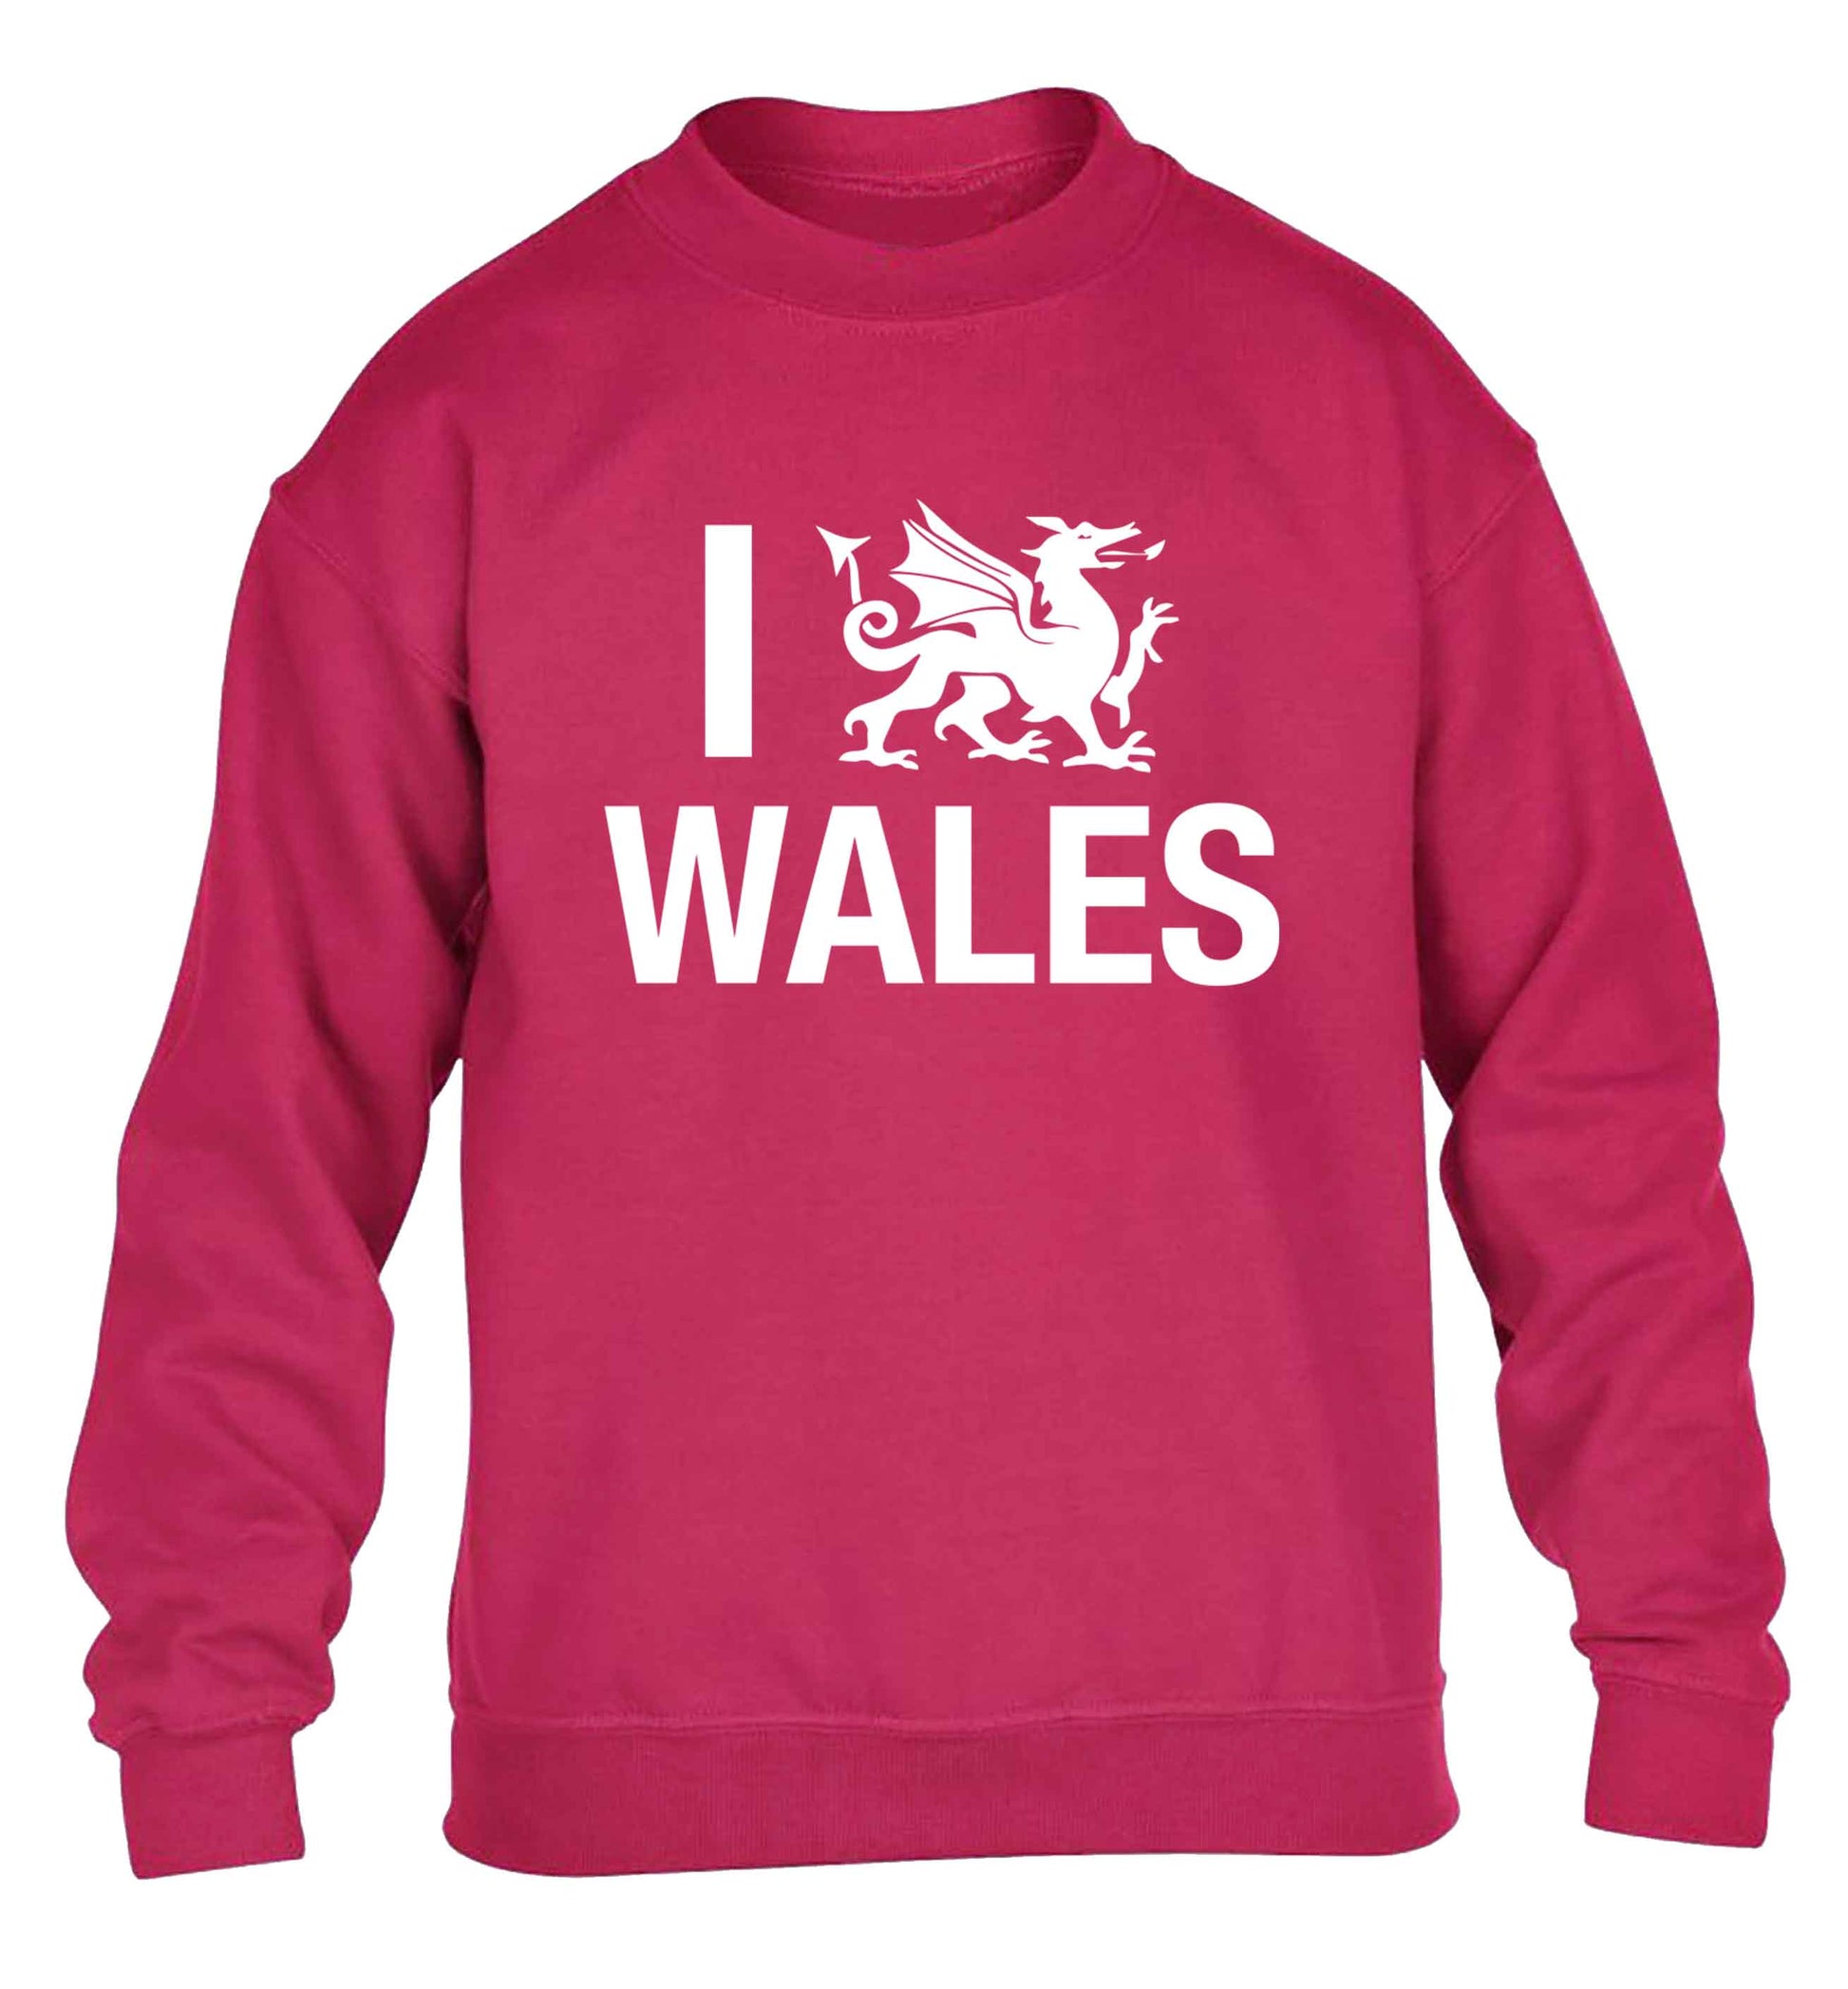 I love Wales children's pink sweater 12-13 Years